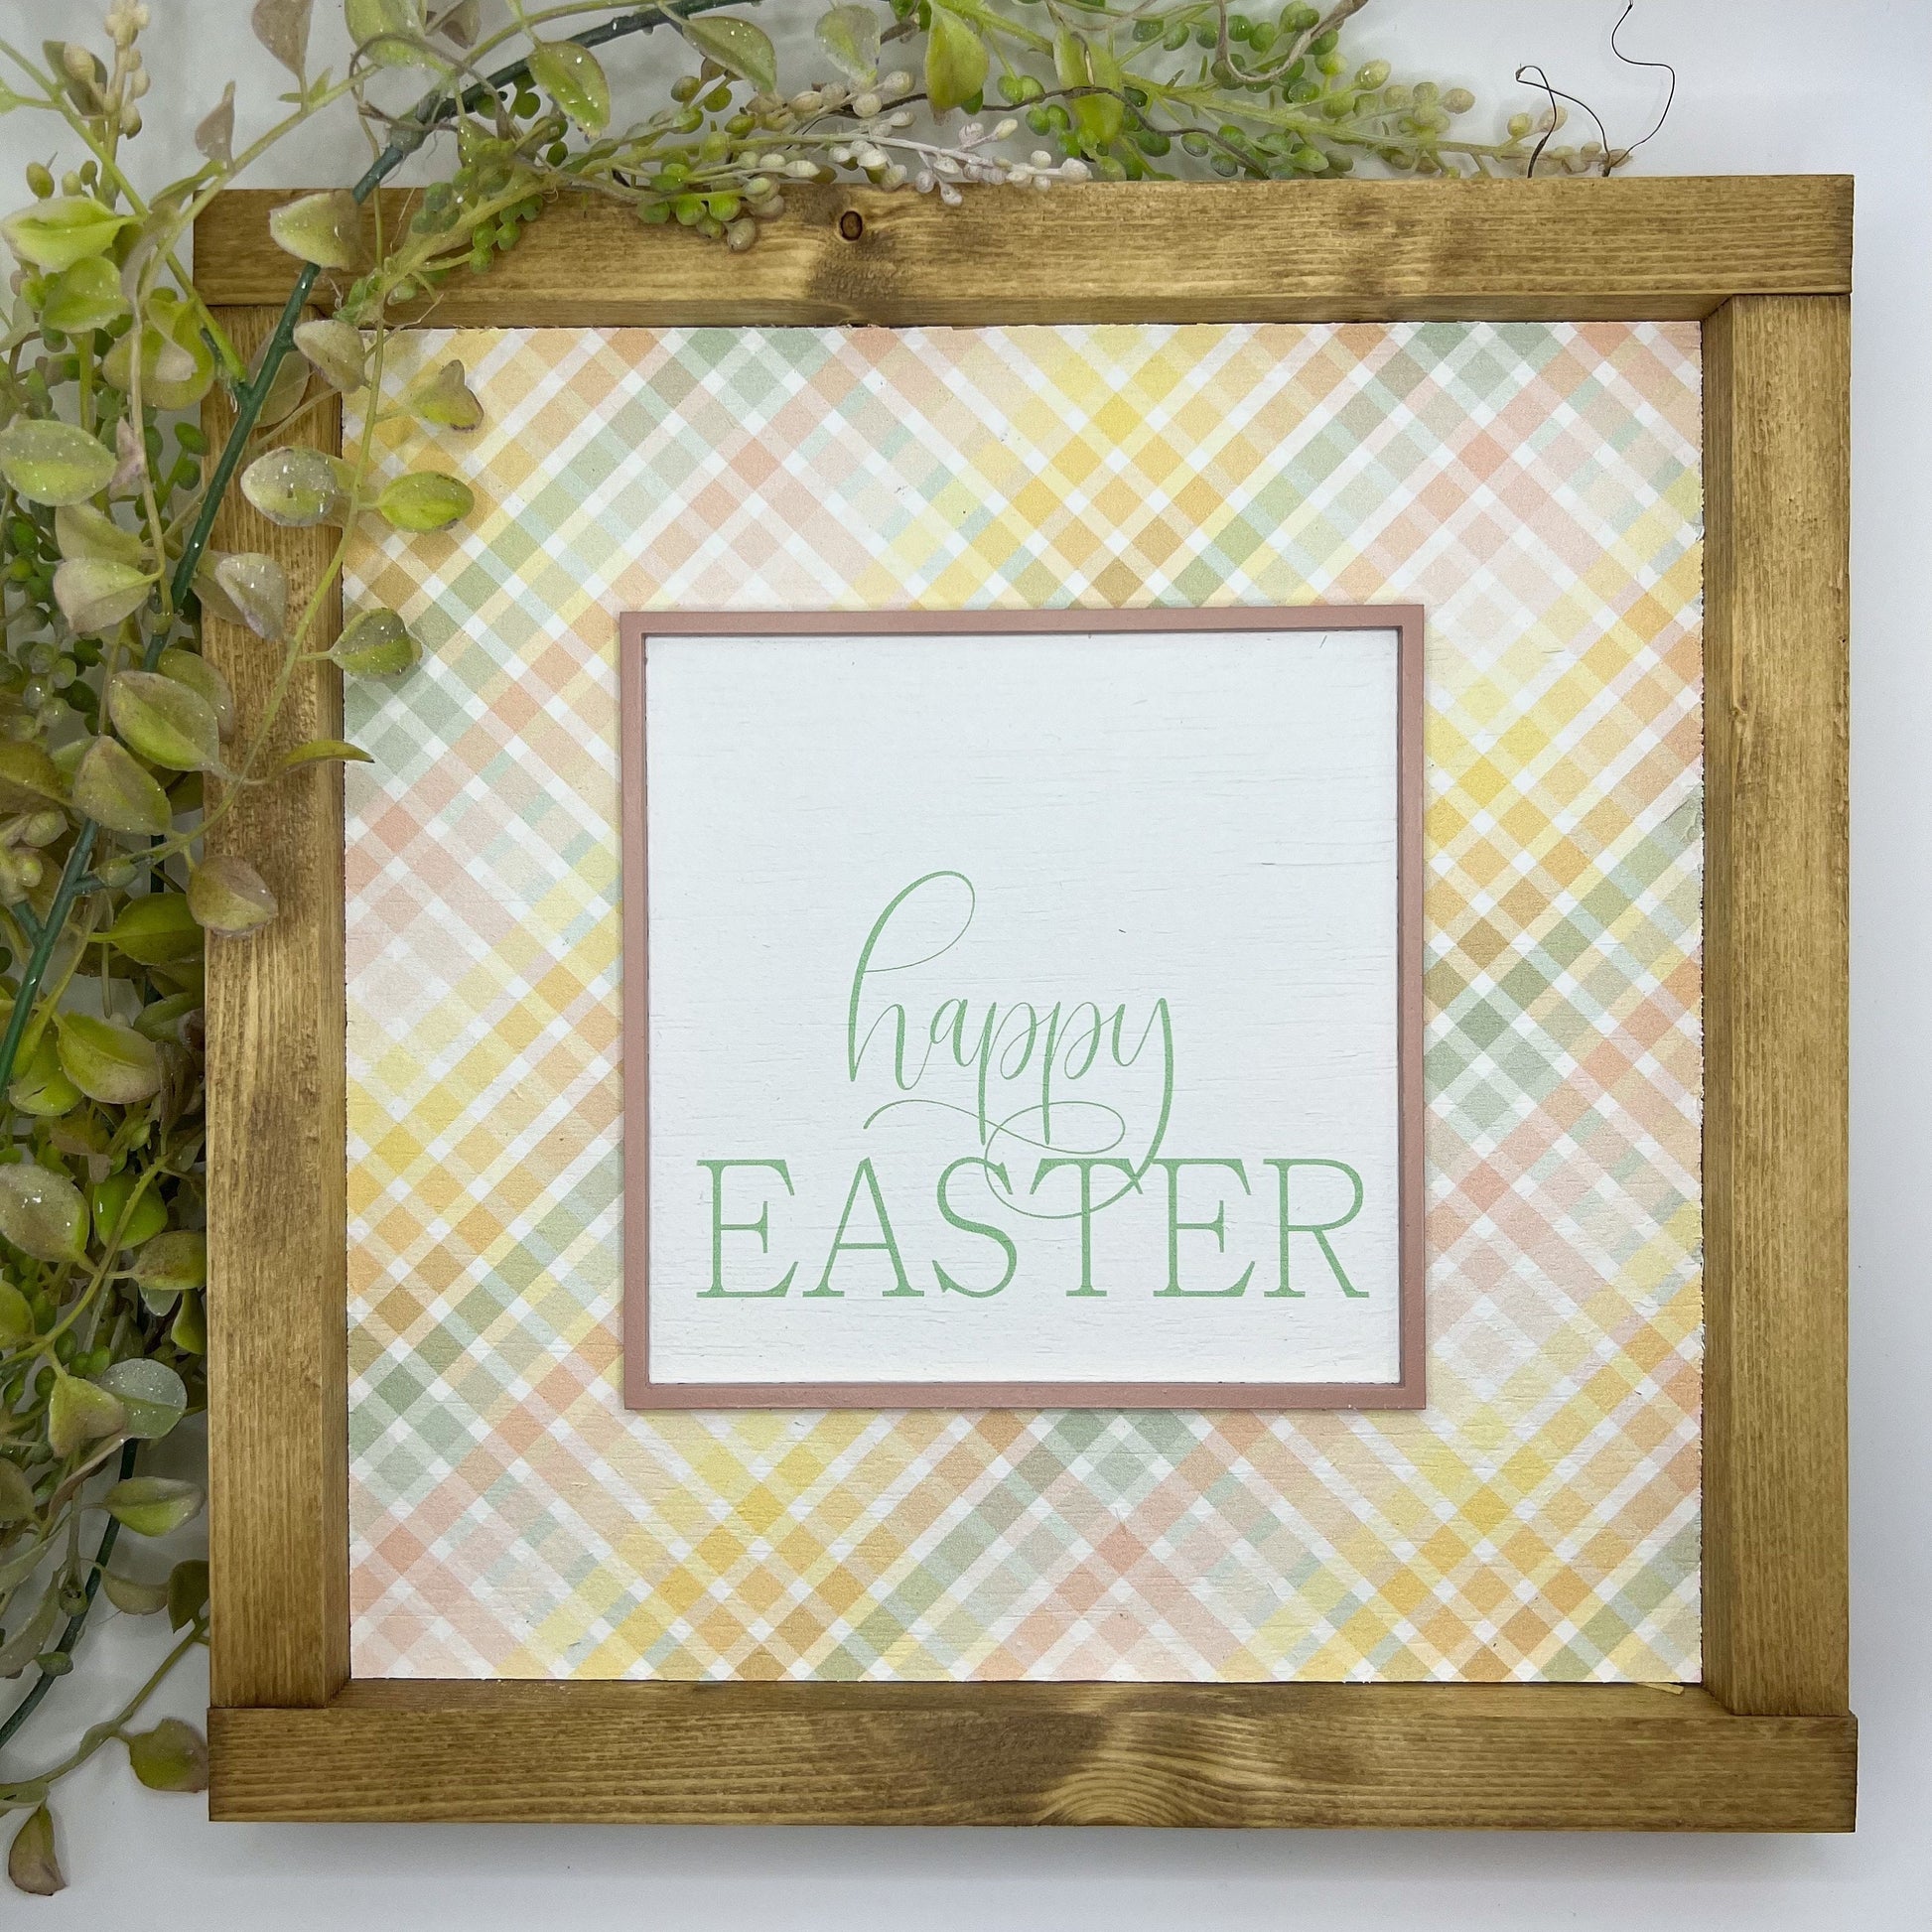 happy EASTER * spring decor * wood sign [FREE SHIPPING!]